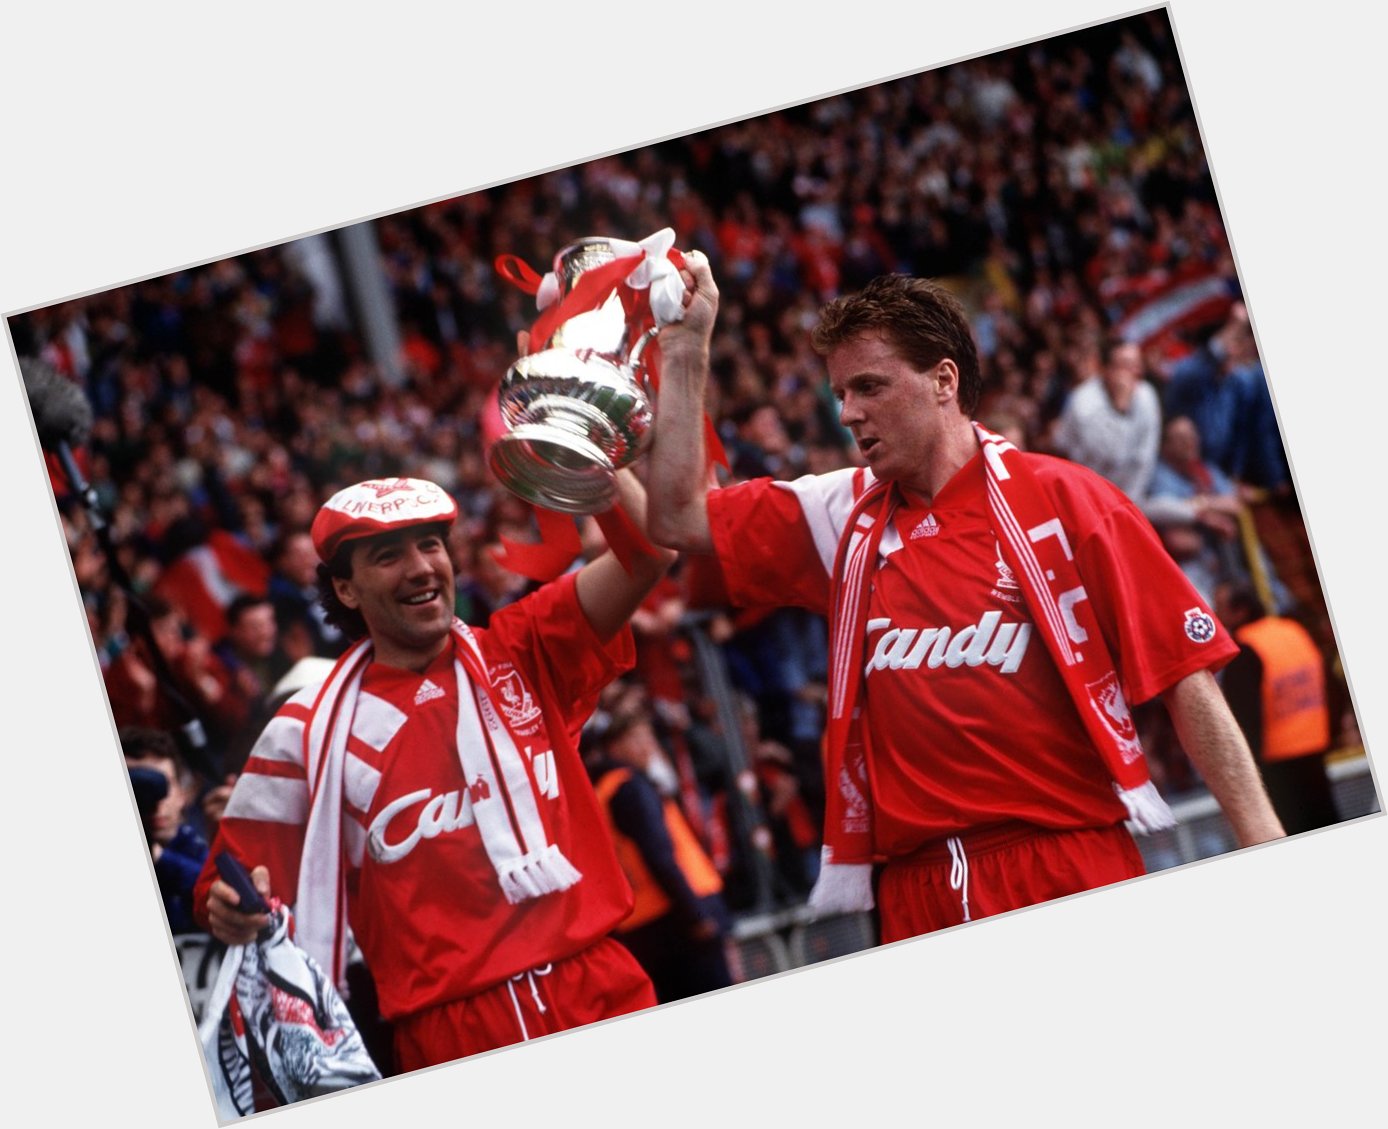 Happy birthday to our 1992 FA Cup winner, Dean Saunders. 